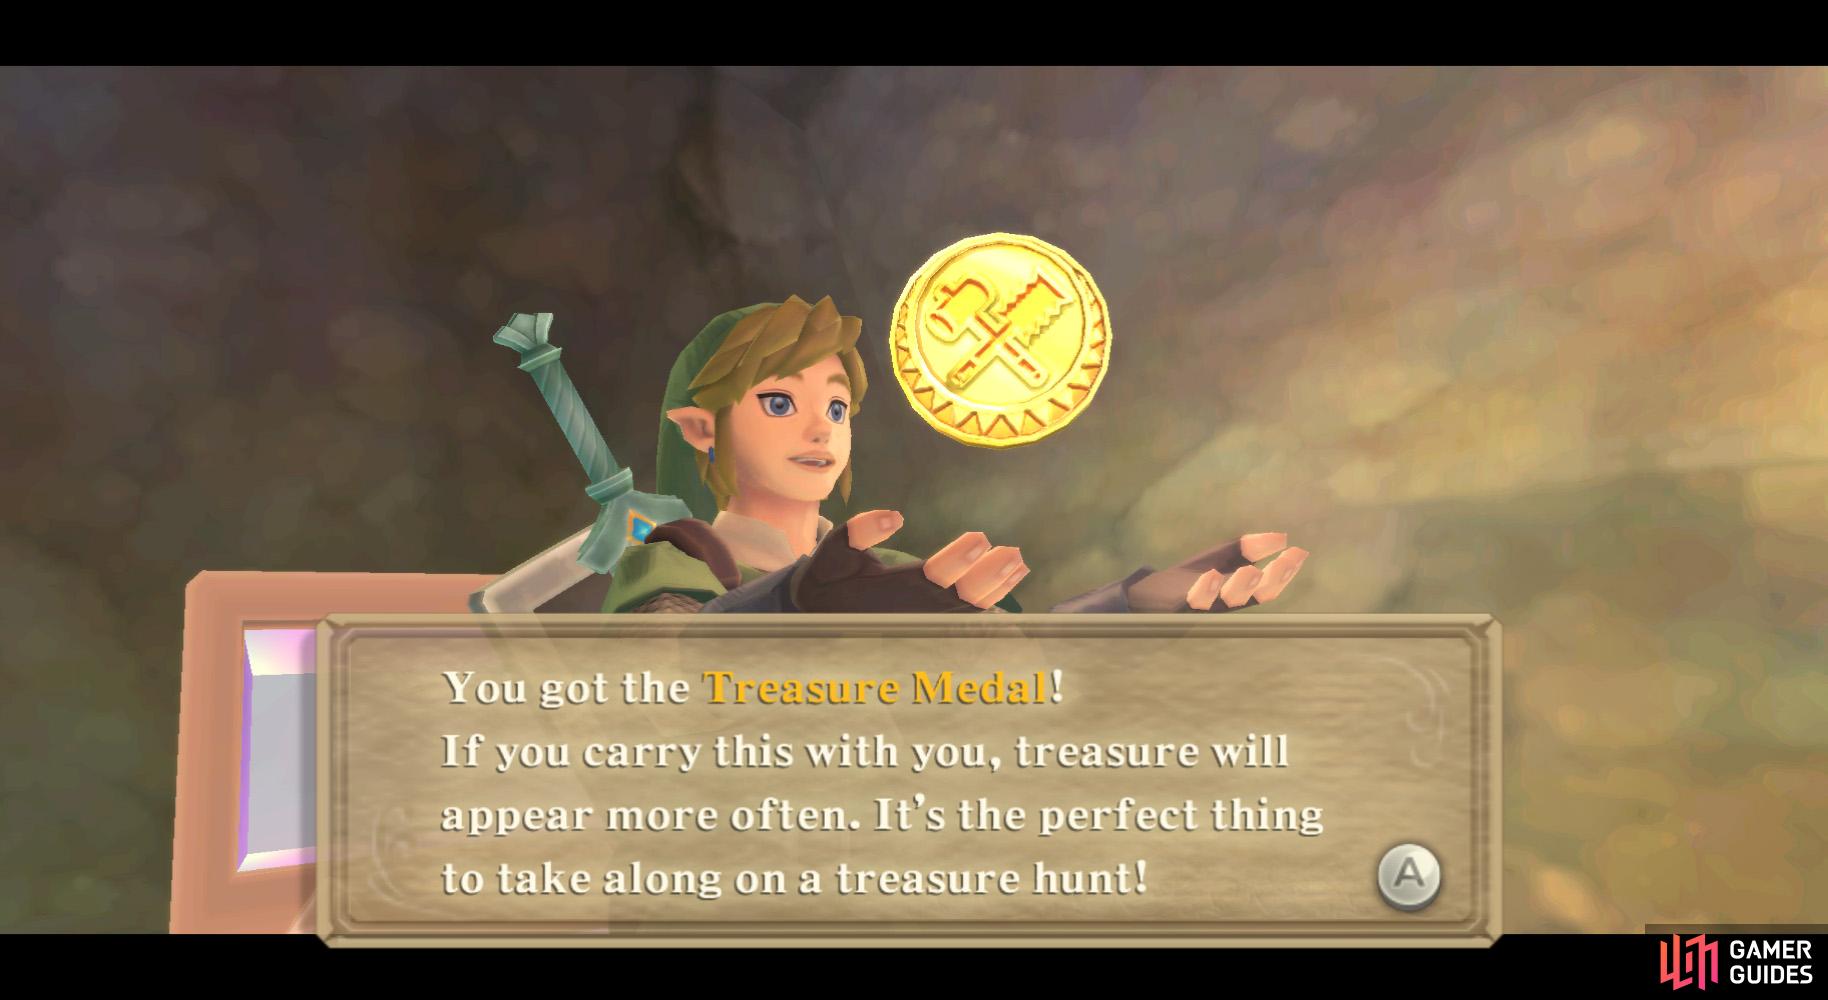 The Treasure Medal lets you find more treasure.